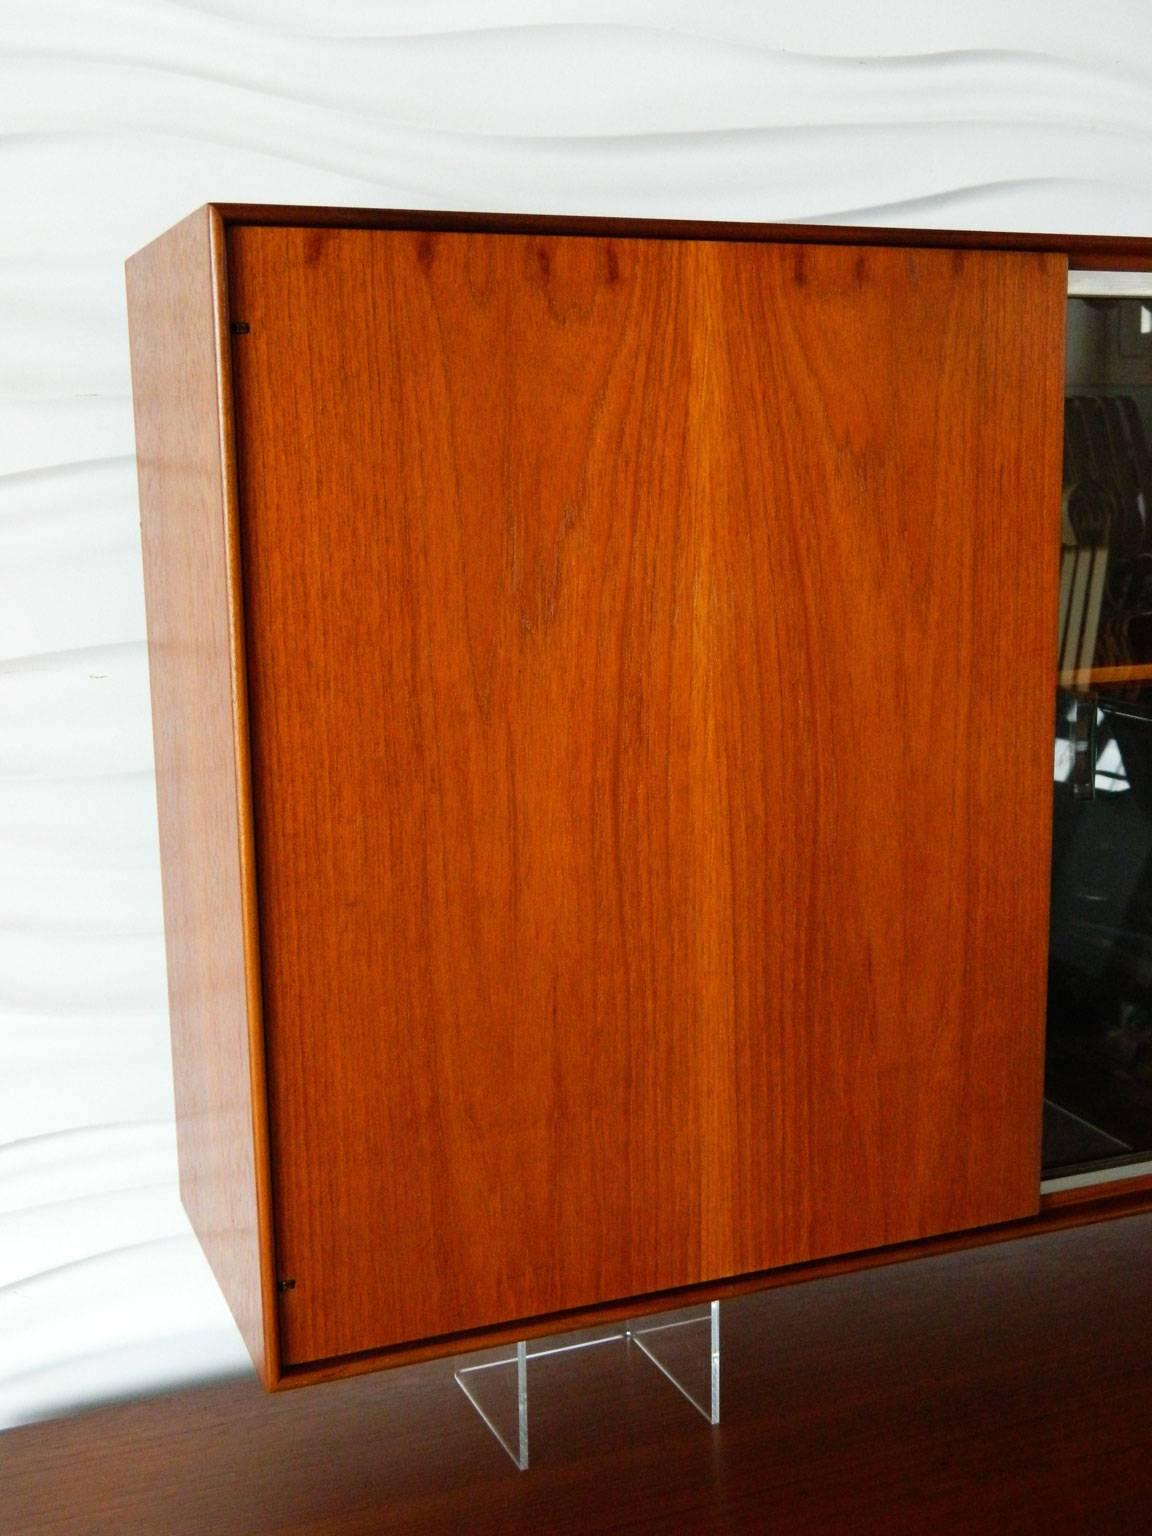 This George Nelson Thin Edge cabinet has one door and two sliding glass doors. It is designed to free-float on a wall. 

This is a wonderful companion piece to our George Nelson Thin Edge sideboard.

